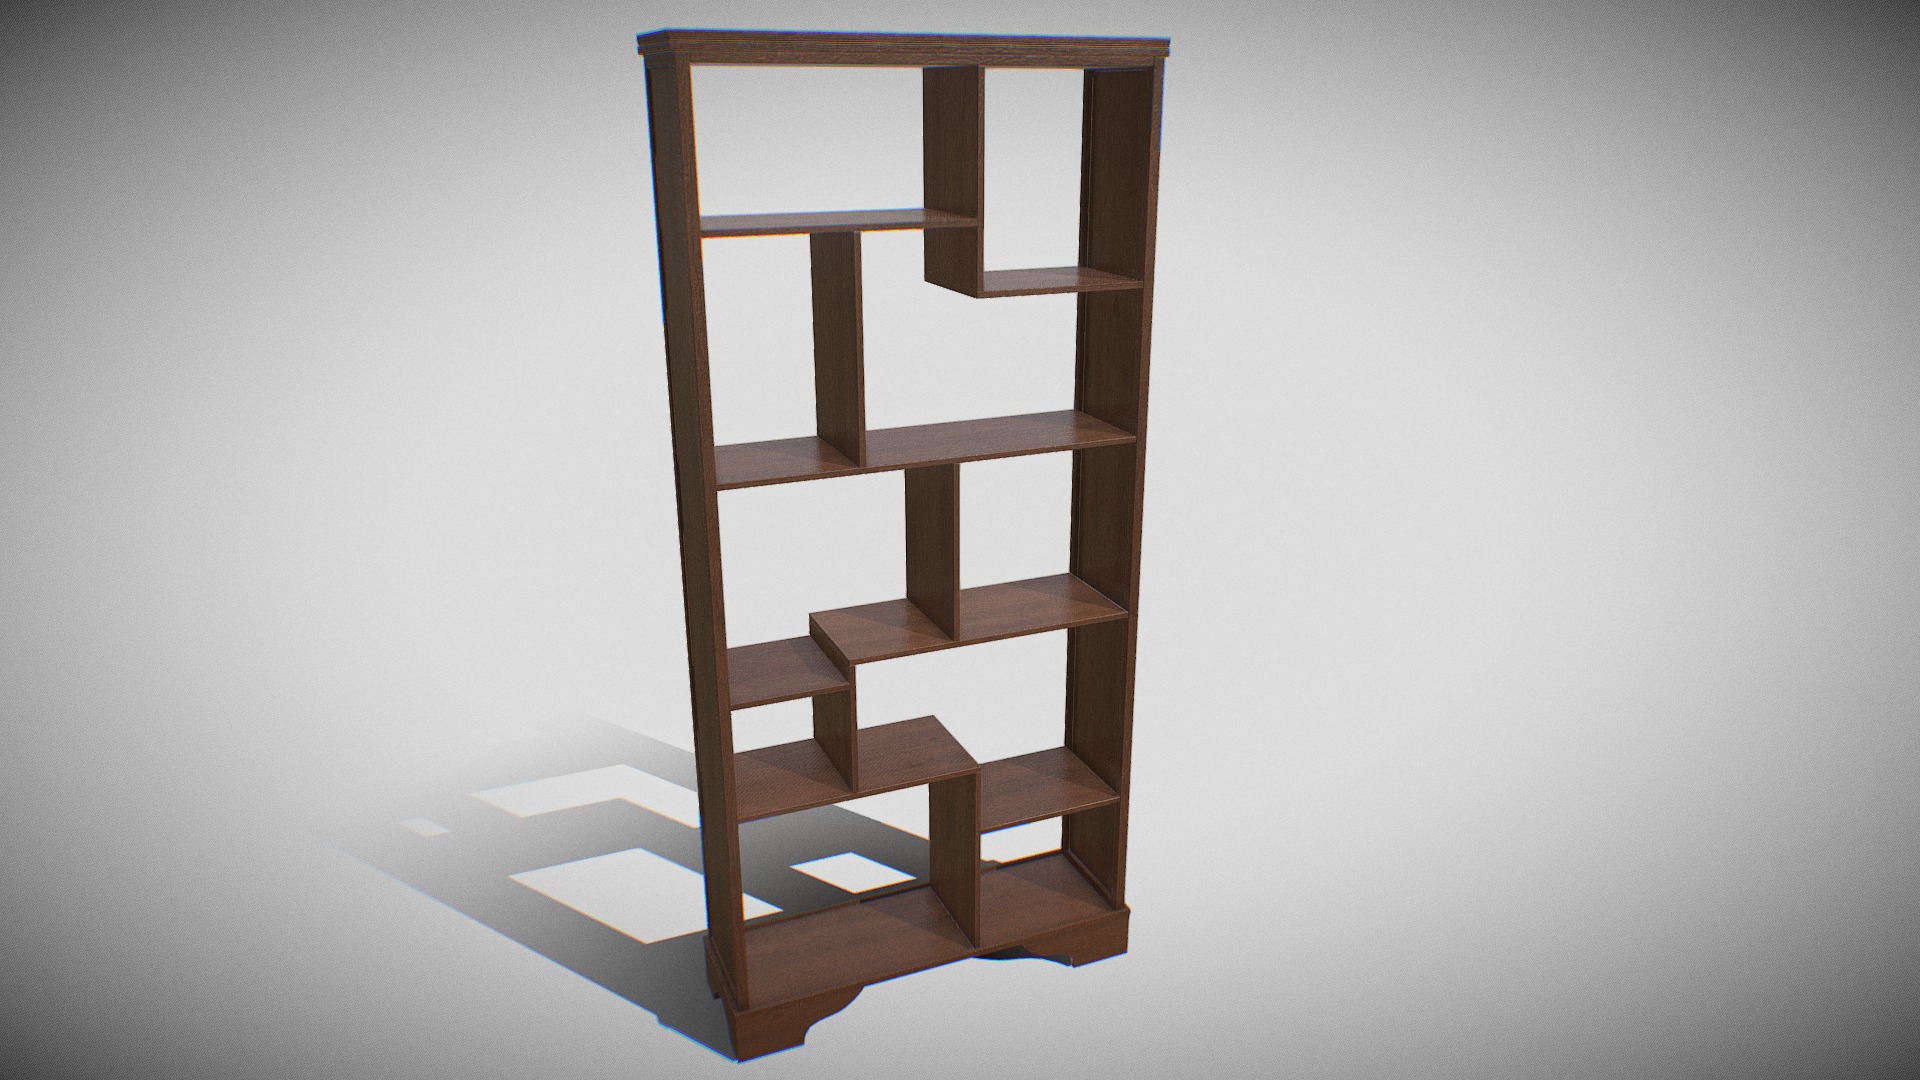 3D model ShelveHighWooden - This is a 3D model of the ShelveHighWooden. The 3D model is about a wooden chair on a white surface.